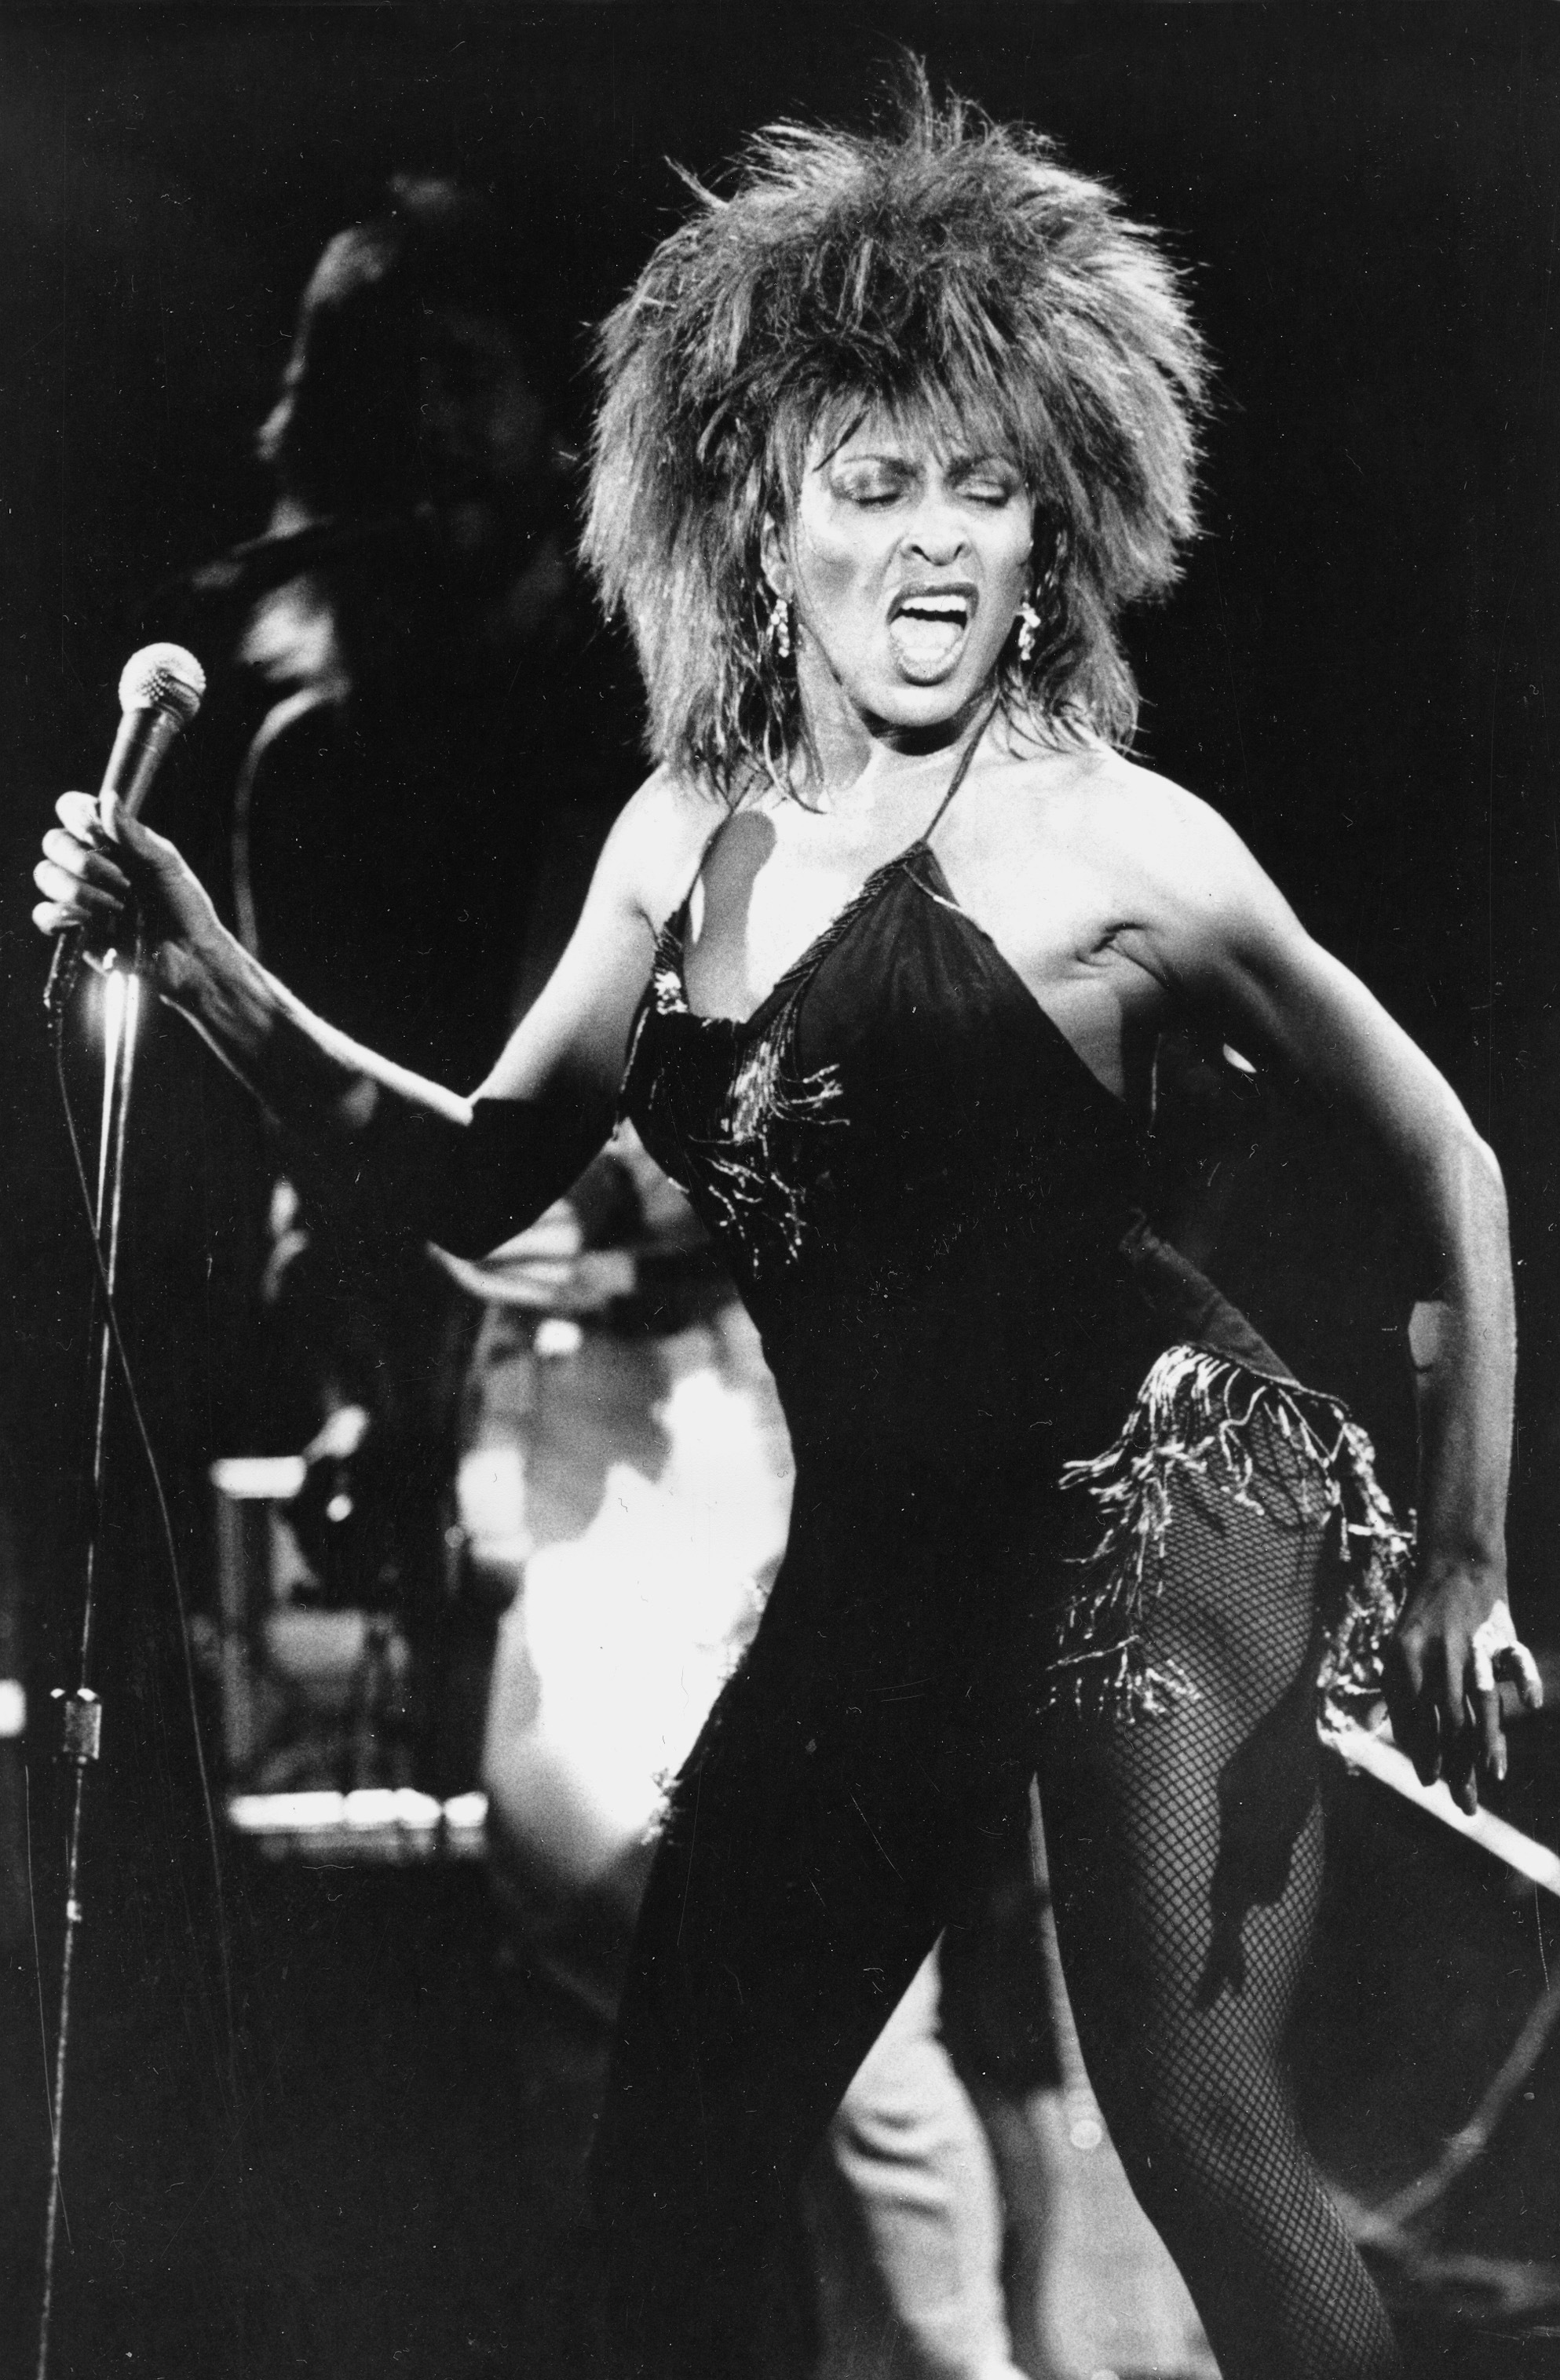 Tina Turner performs her hit "What's Love Got to Do With It" in Los Angeles on September 2, 1984. (PHOTO: AP/Phil Ramey)